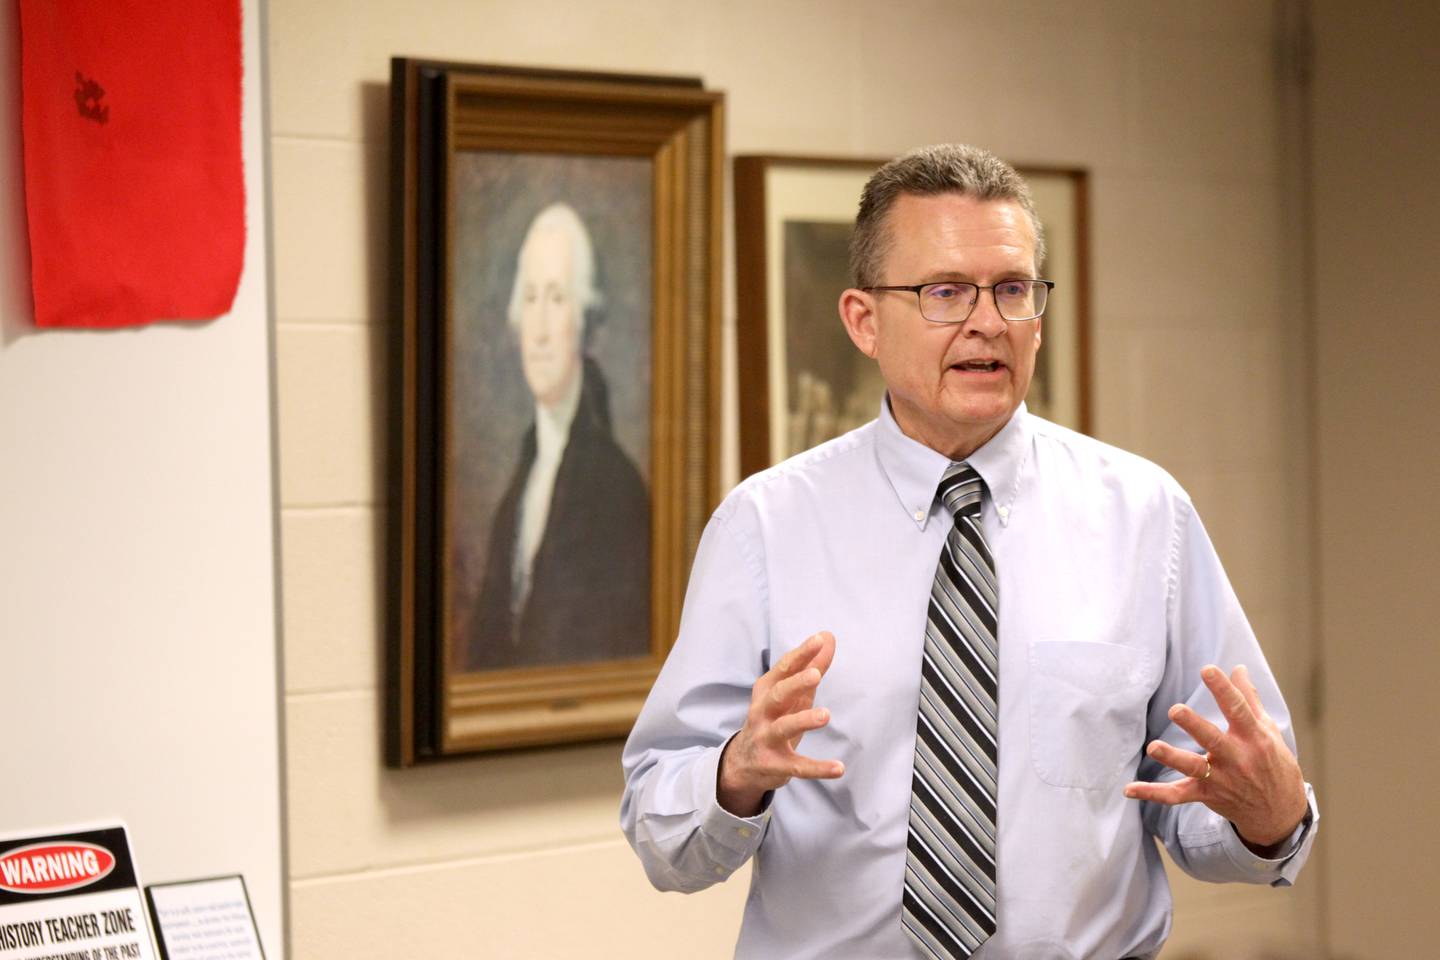 Geneva Middle School North’s James Cook teaches social studies, American history and the Constitution as well as coaching track. Cook will be retiring this year after 26 years with the district.